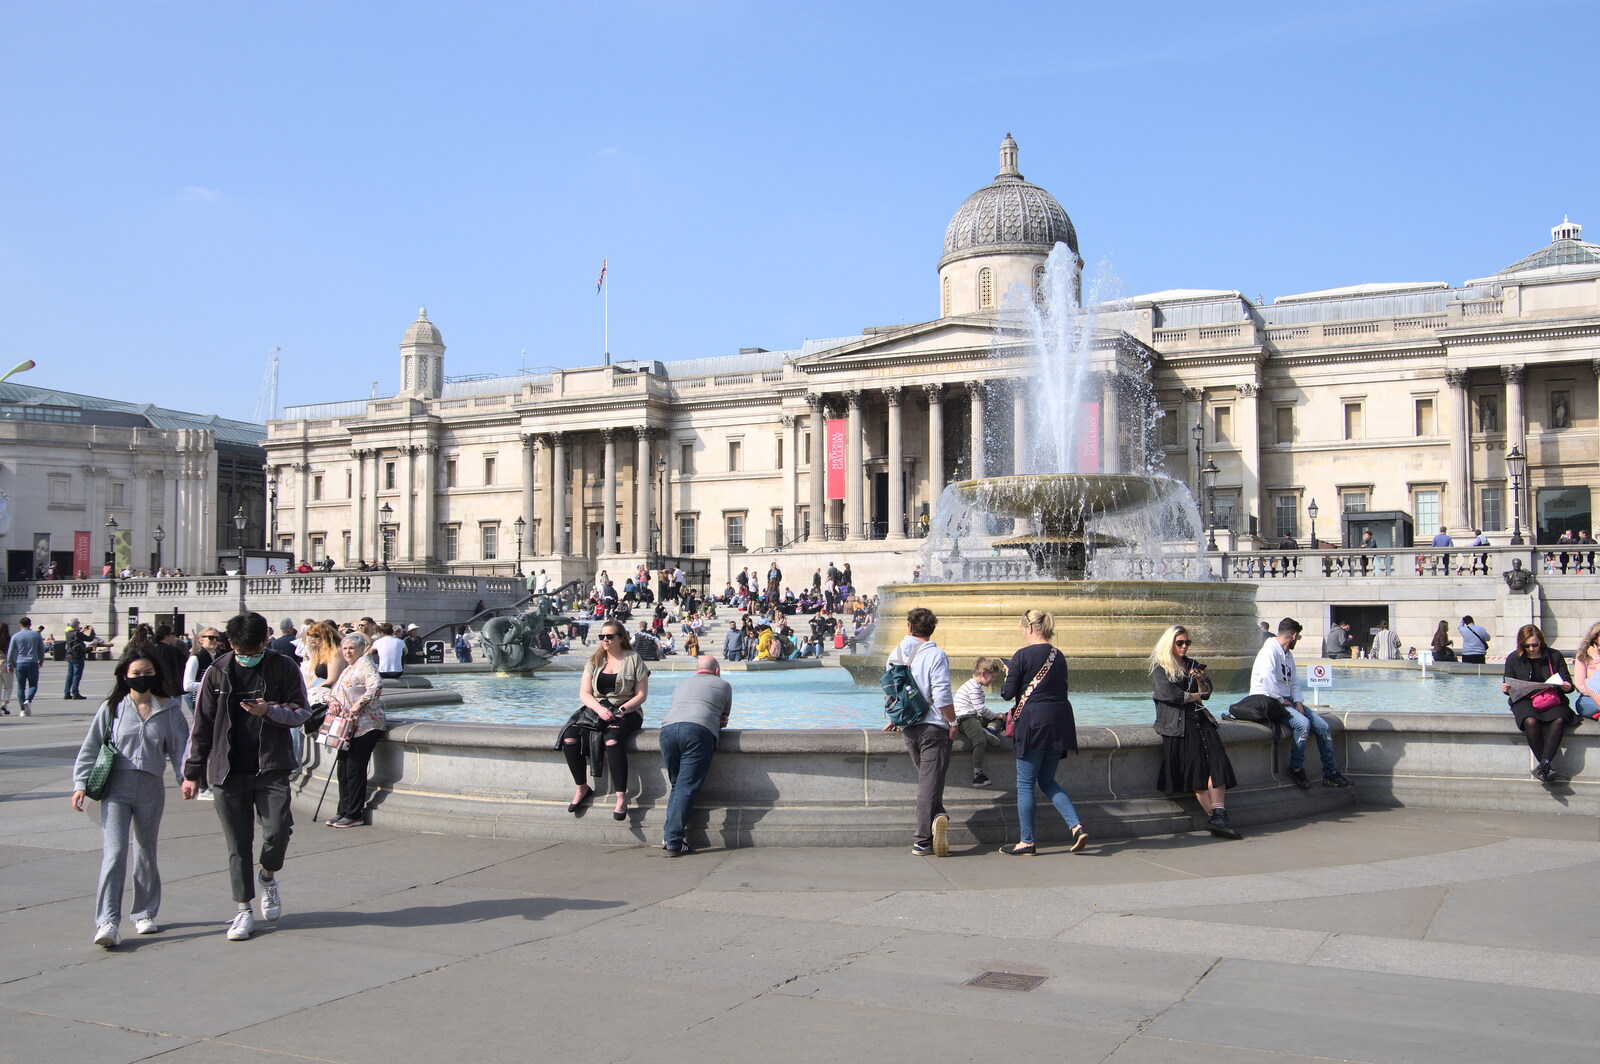 A Walk Around the South Bank, London - 25th March 2022: The National Gallery in Trafalgar Square